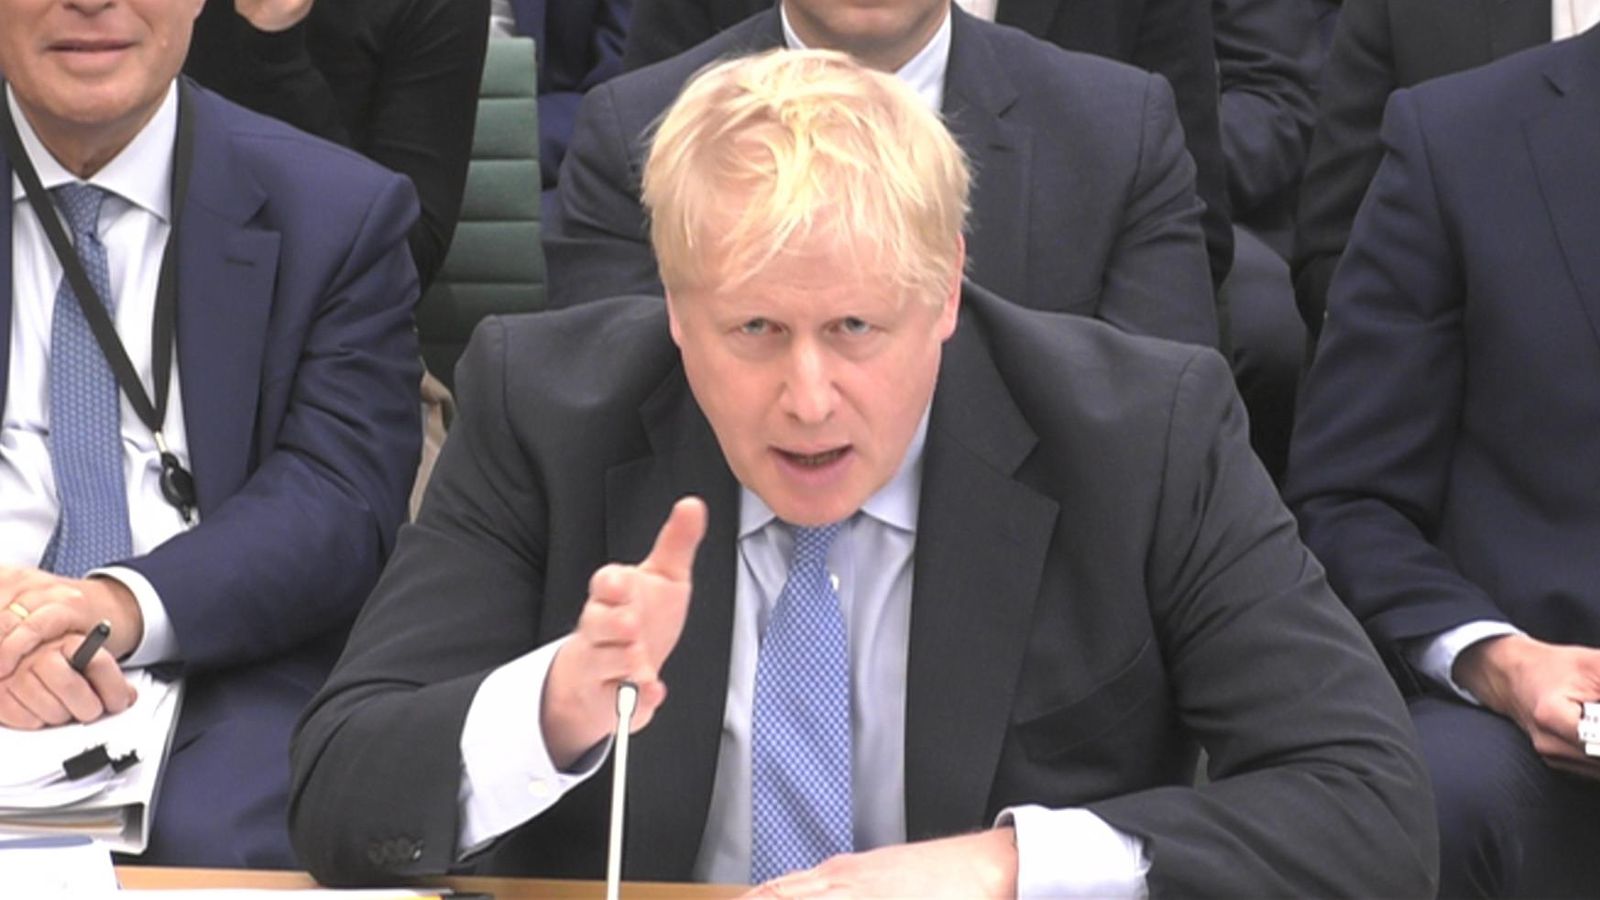 Boris Johnson to bypass Cabinet Office and hand over unredacted messages directly to COVID inquiry